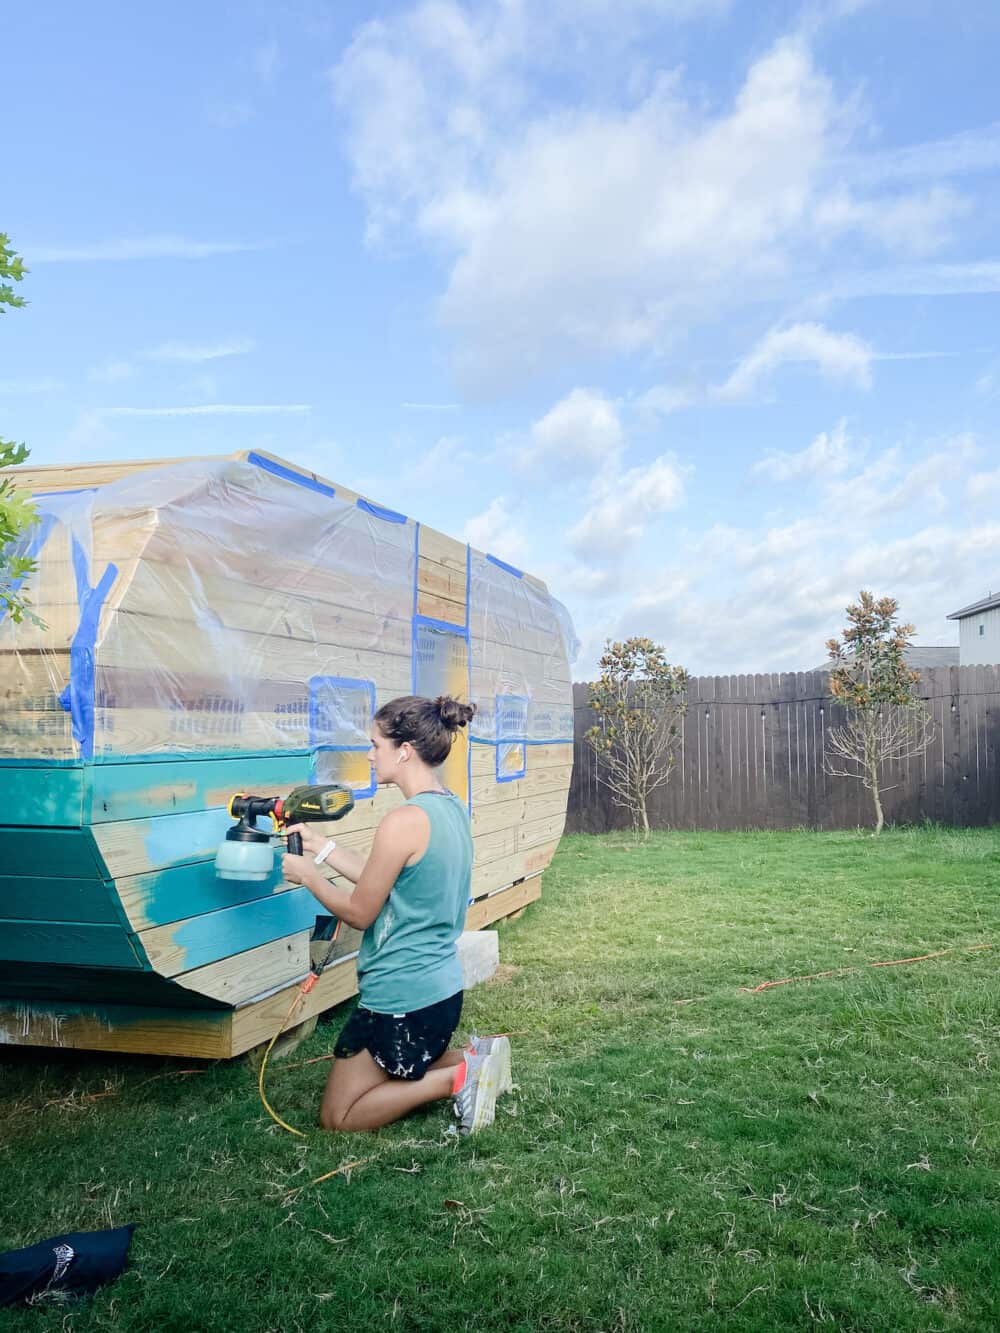 Woman painting a playhouse with a Wagner paint sprayer